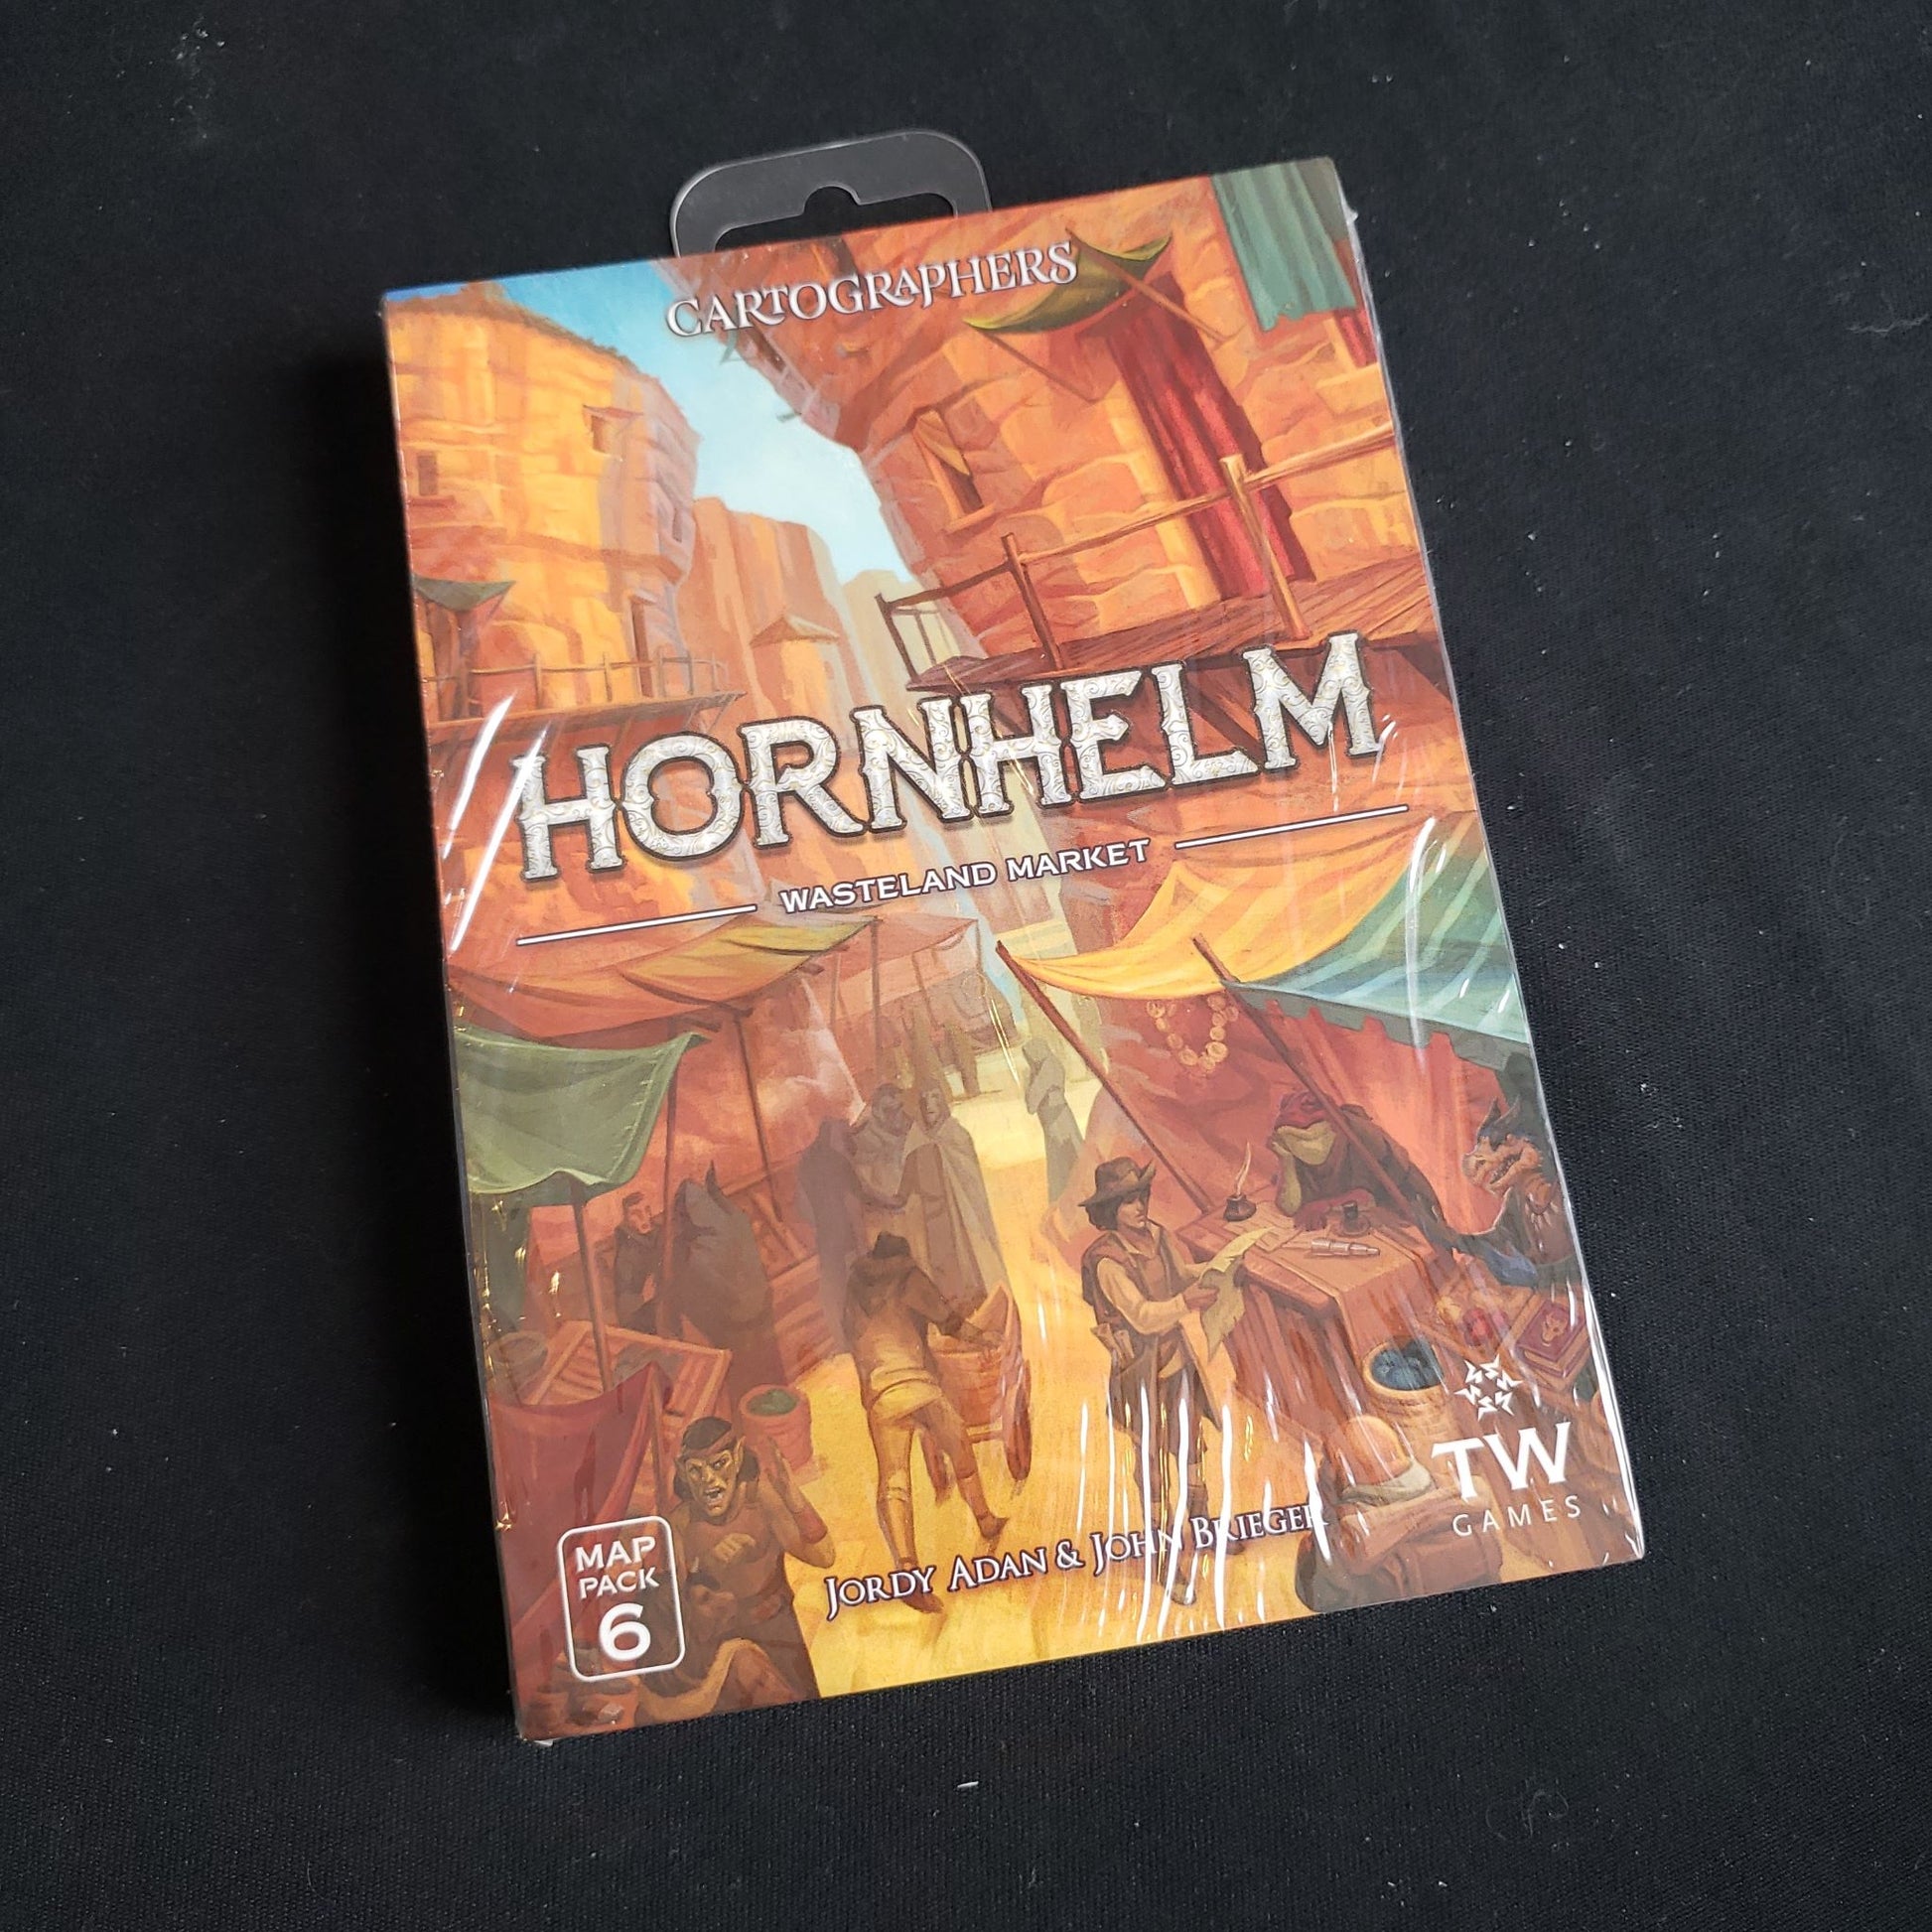 Image shows the front of the package for the Hornhelm Market expansion for the Cartographers game